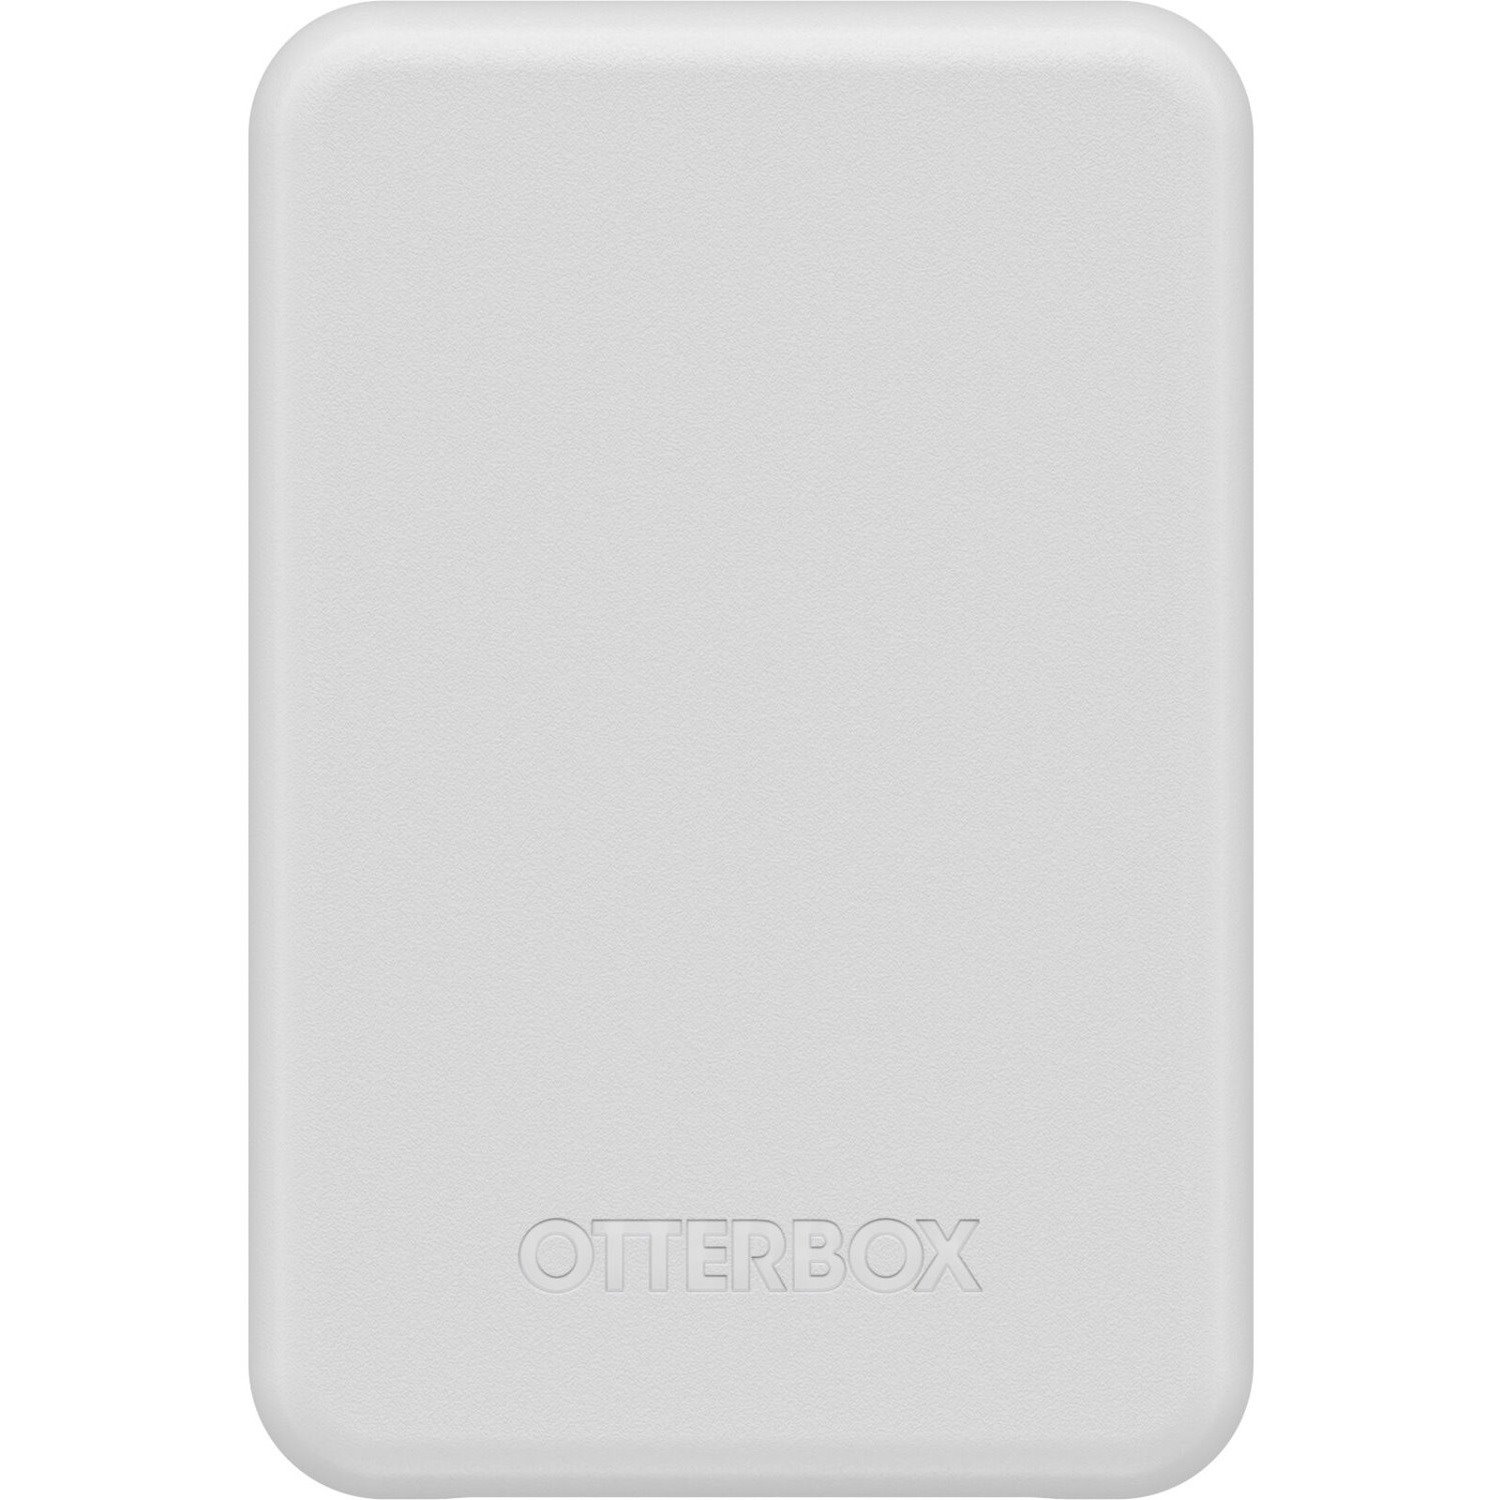 OtterBox Wireless Power Bank for MagSafe, 5k mAh